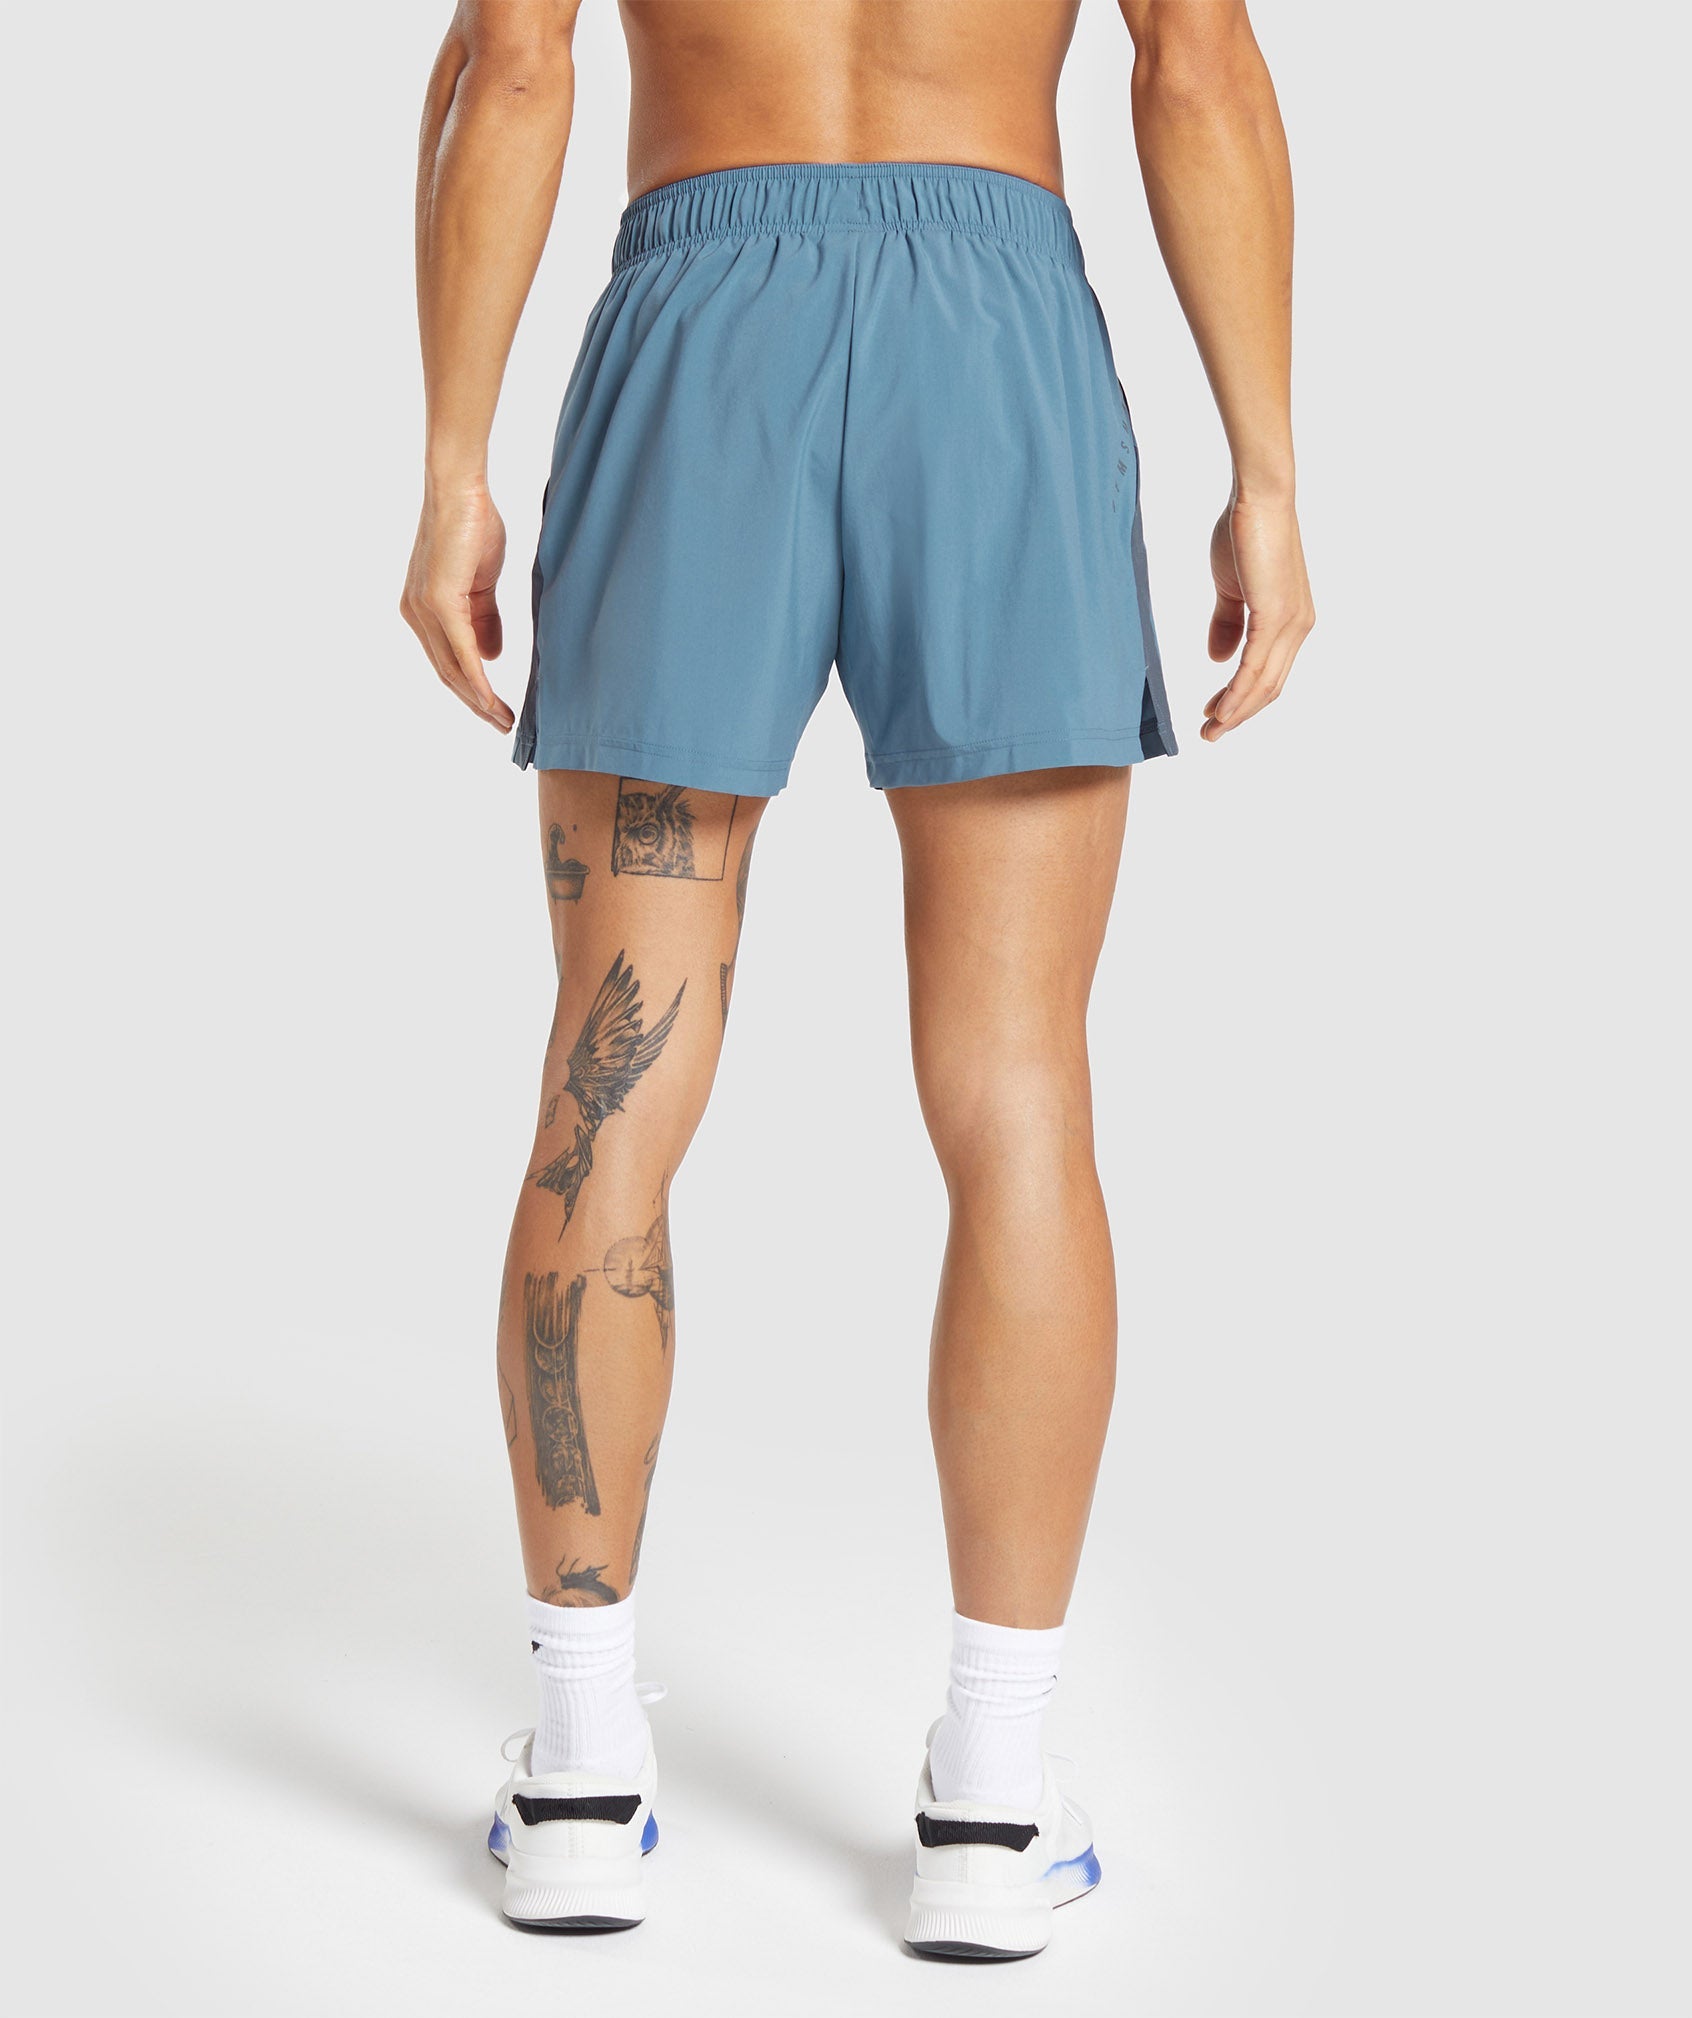 Sport 5" Shorts in Faded Blue/Titanium Blue - view 2